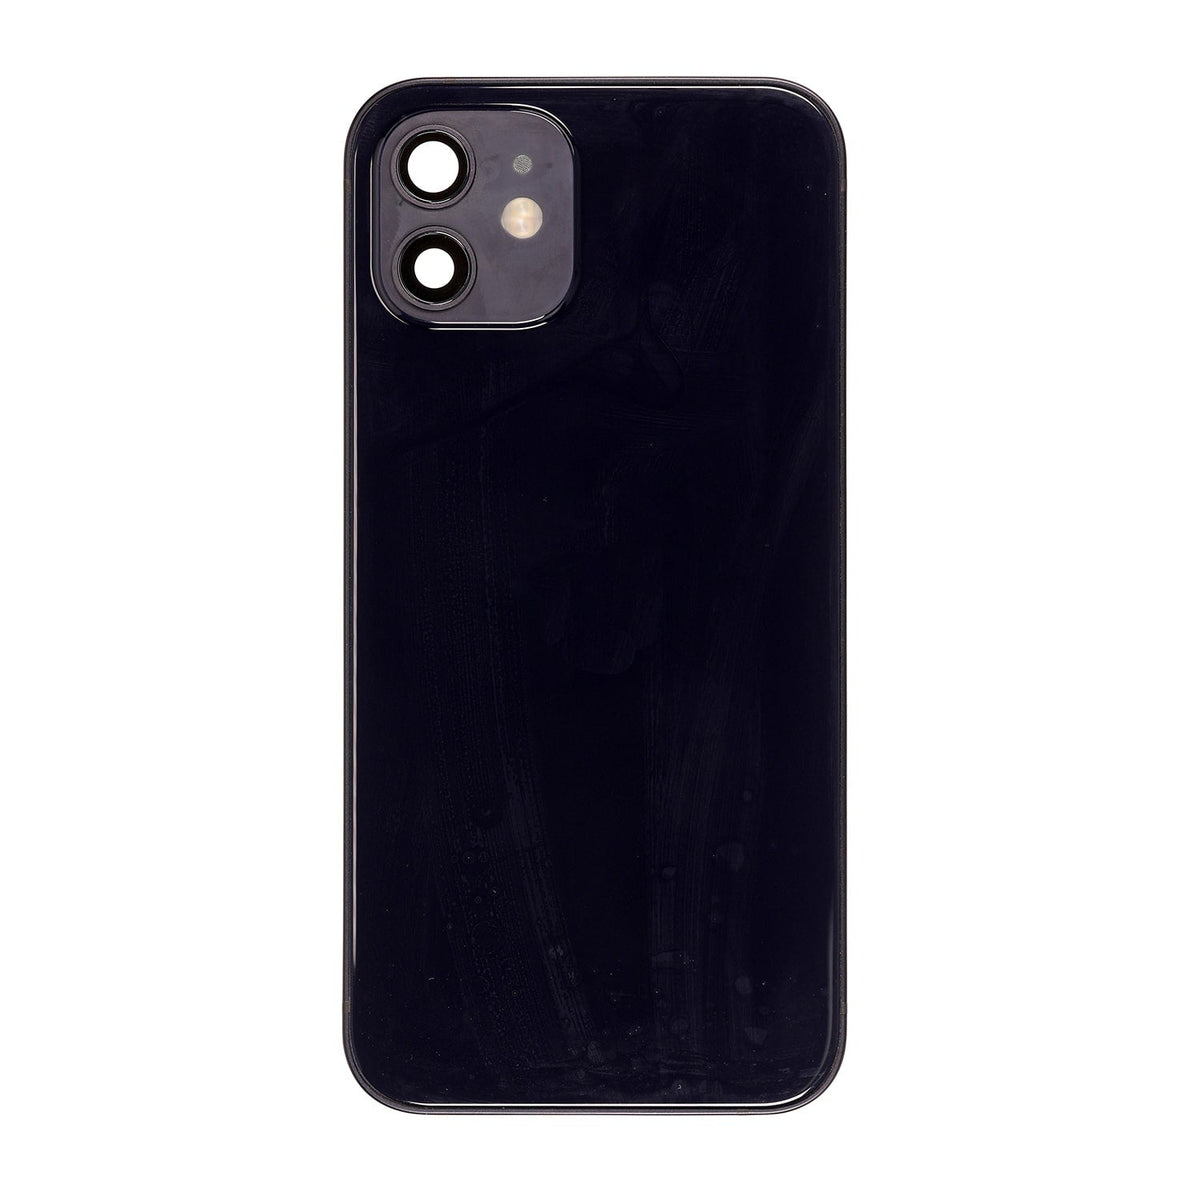 BACK COVER FULL ASSEMBLY FOR IPHONE 12 - BLACK